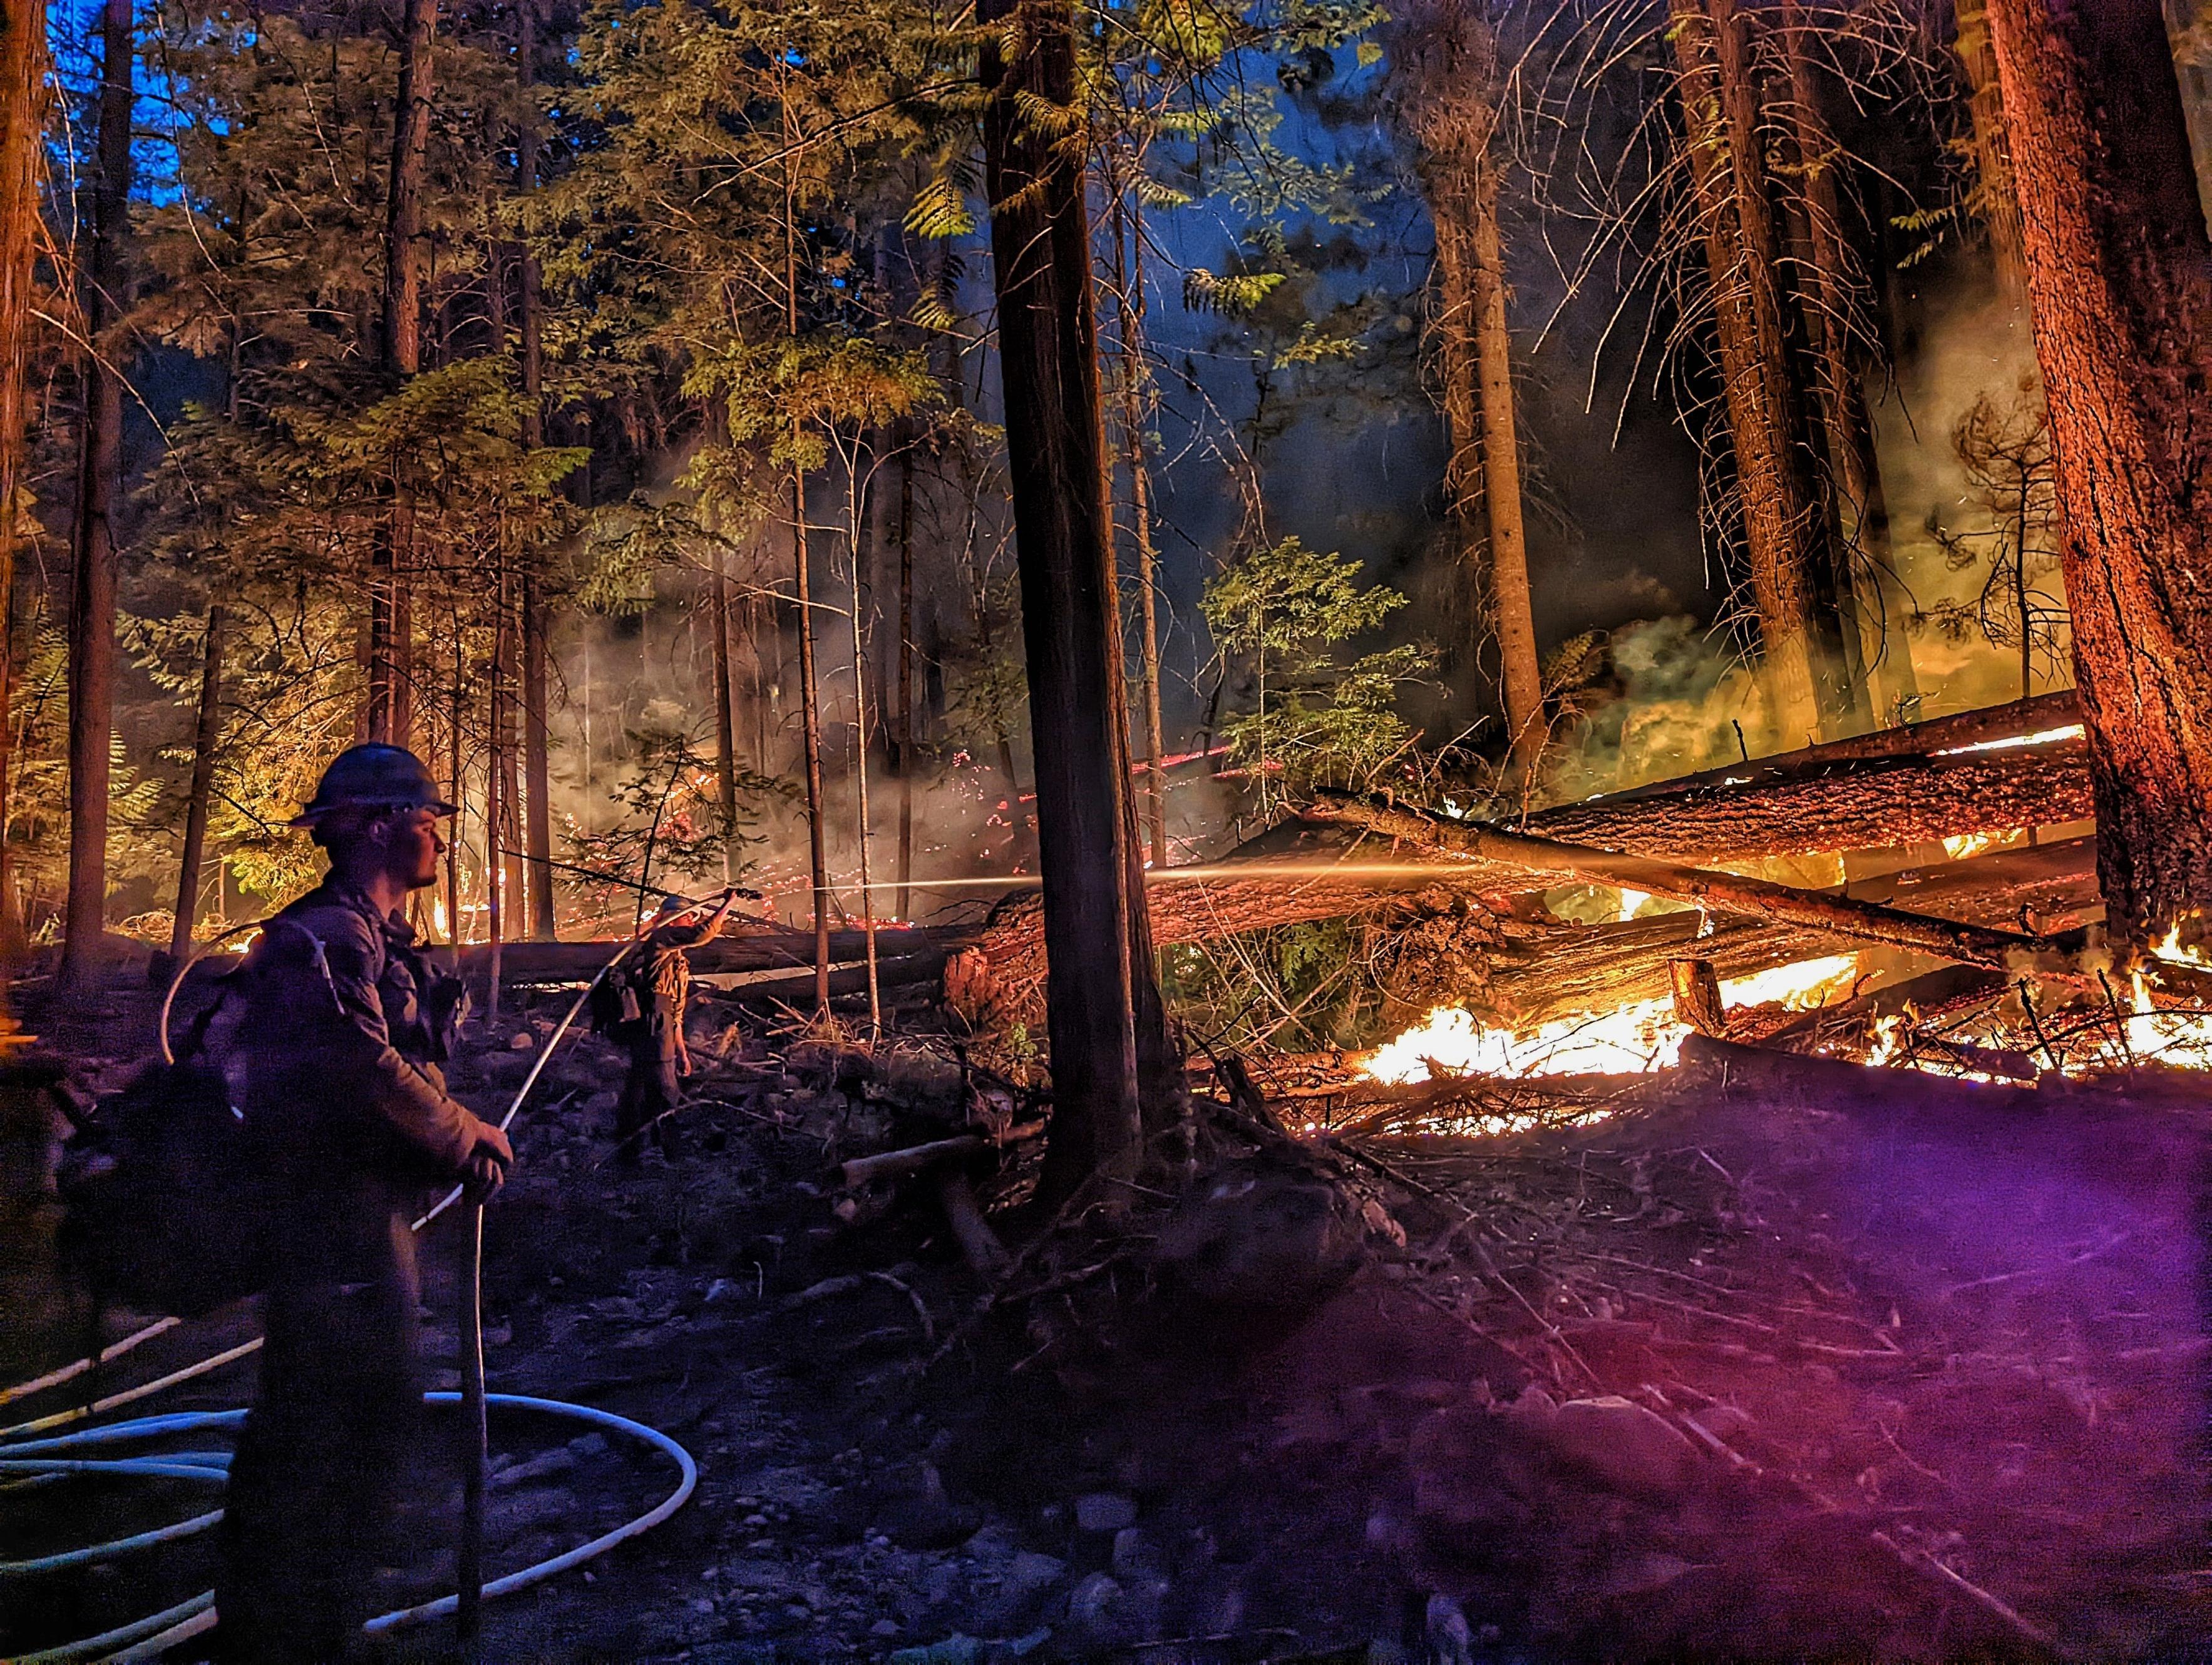 Night shift holding the line Sept. 13. Two firefighters cooling off a section of line with hose and water.